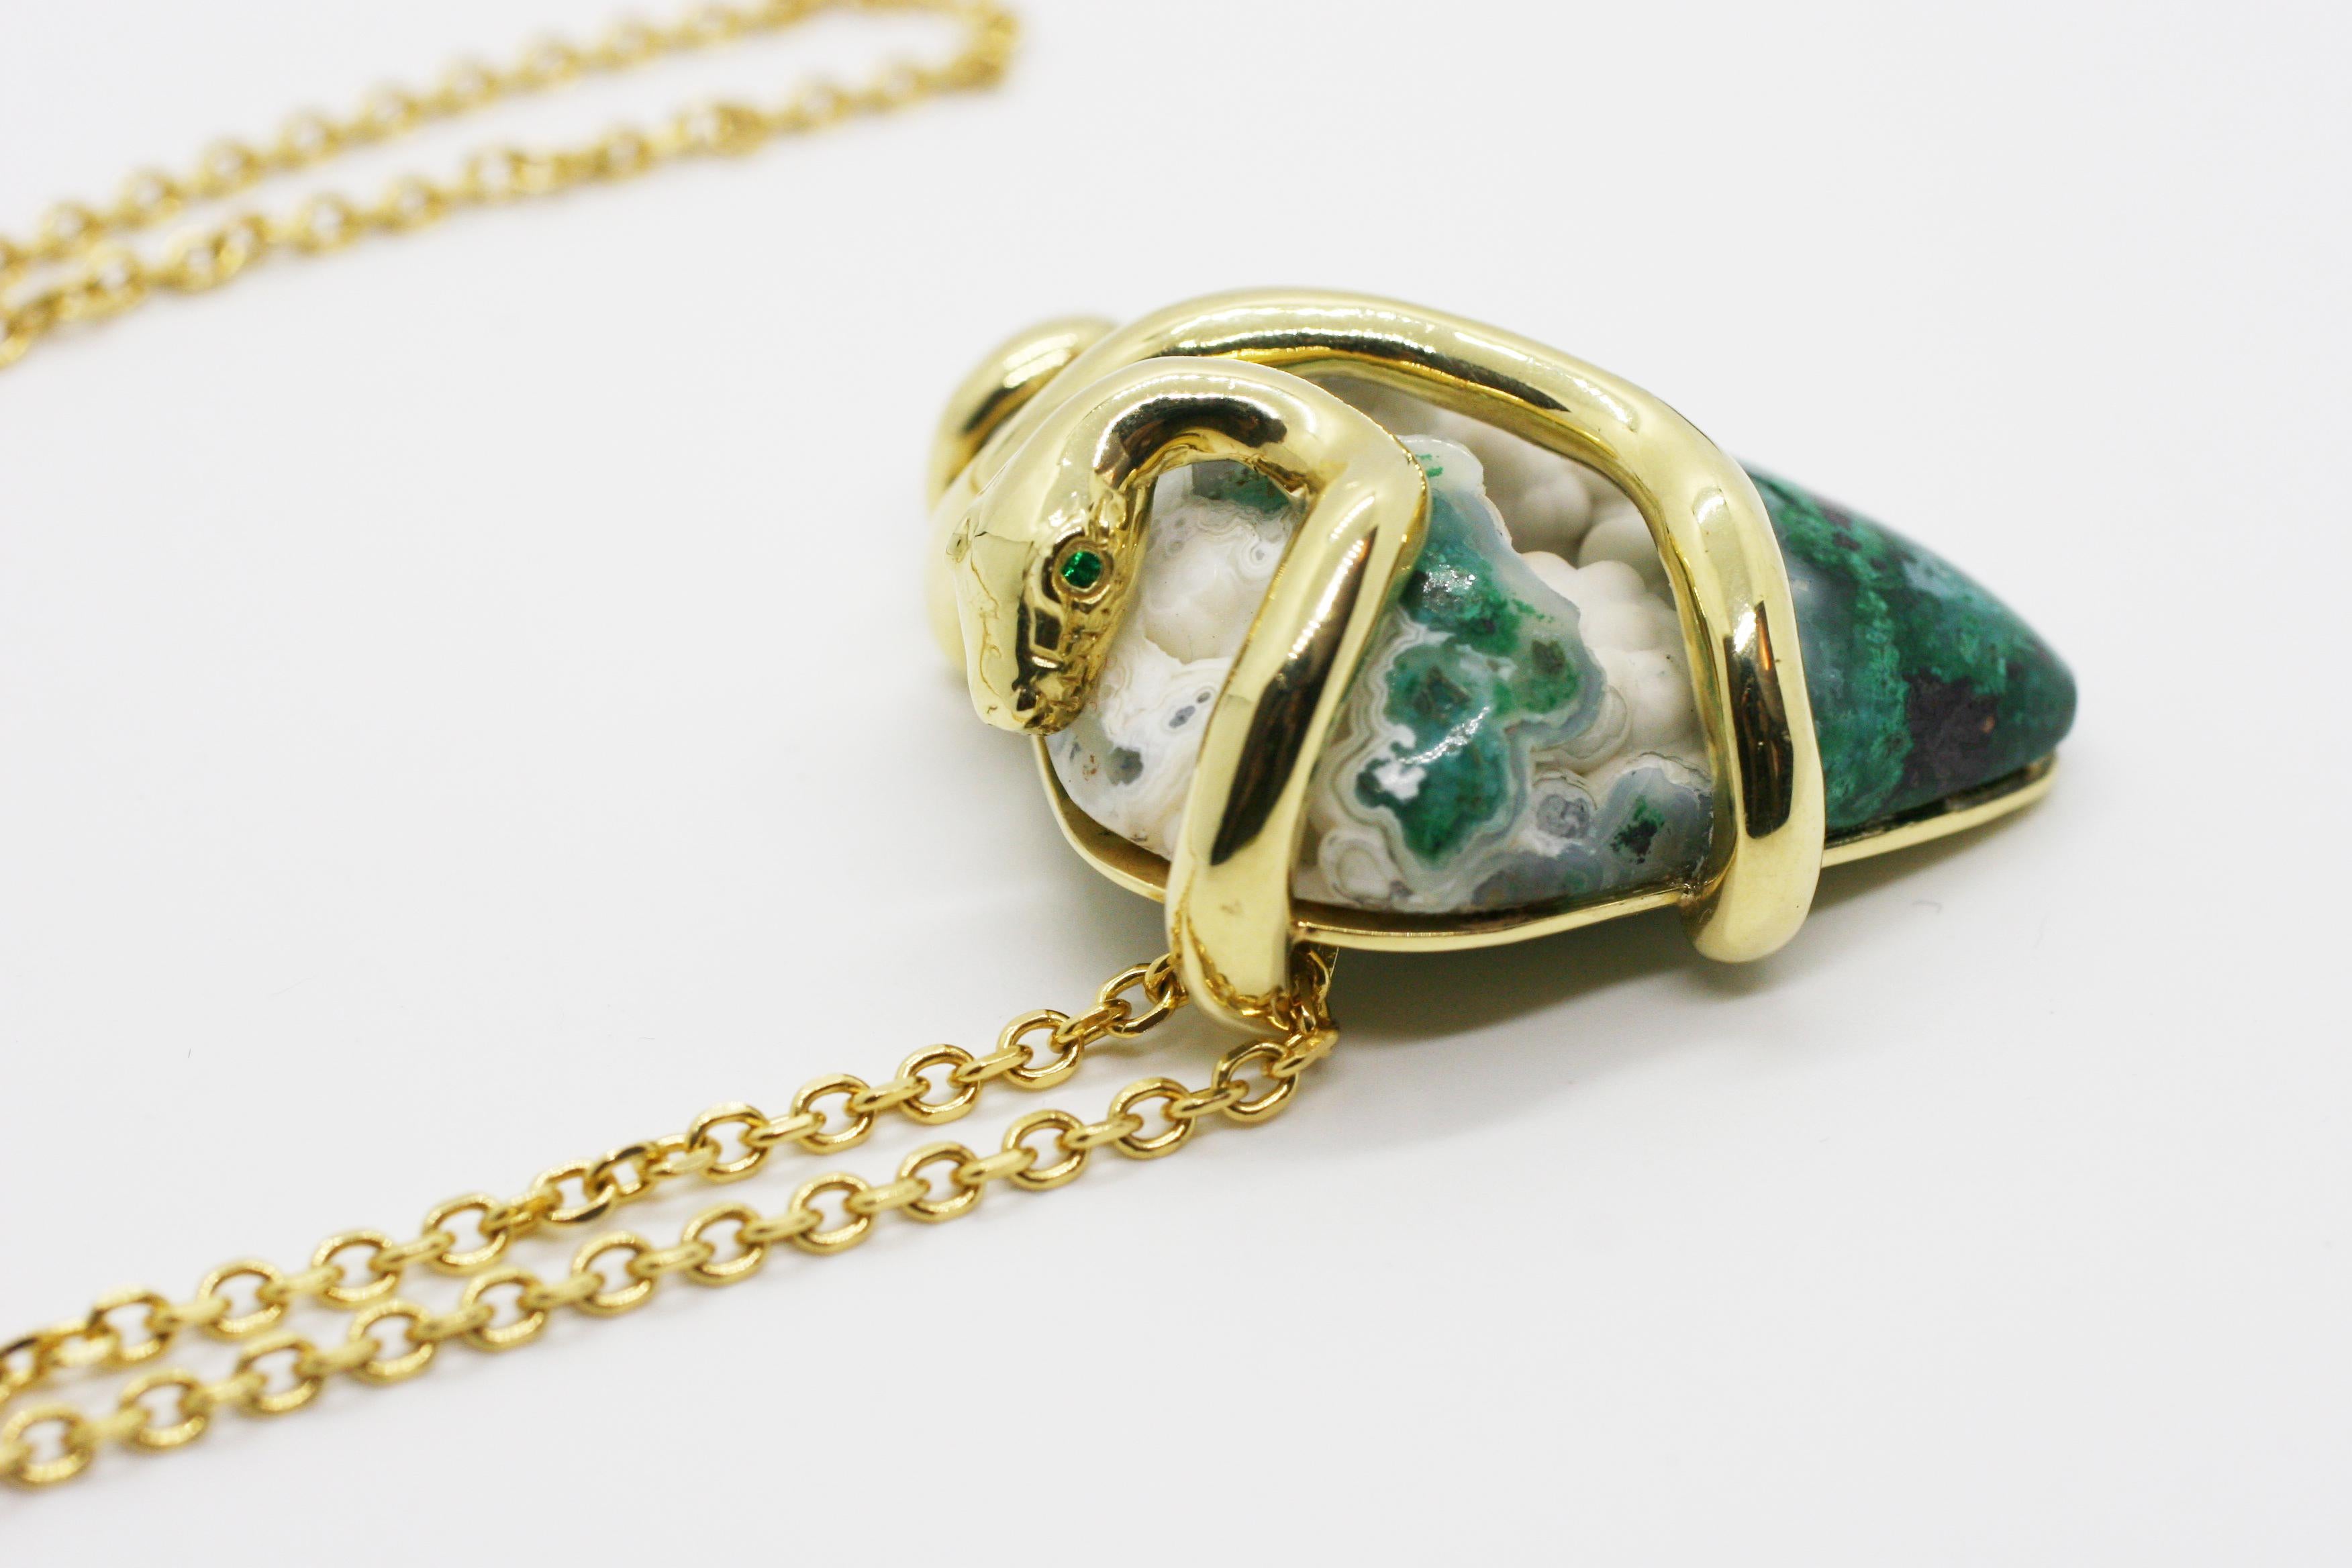  18 Karat One of A Kind LargeAustralian Chrysocolla Snake Pendant Chain Necklace In New Condition For Sale In West Hollywood, CA